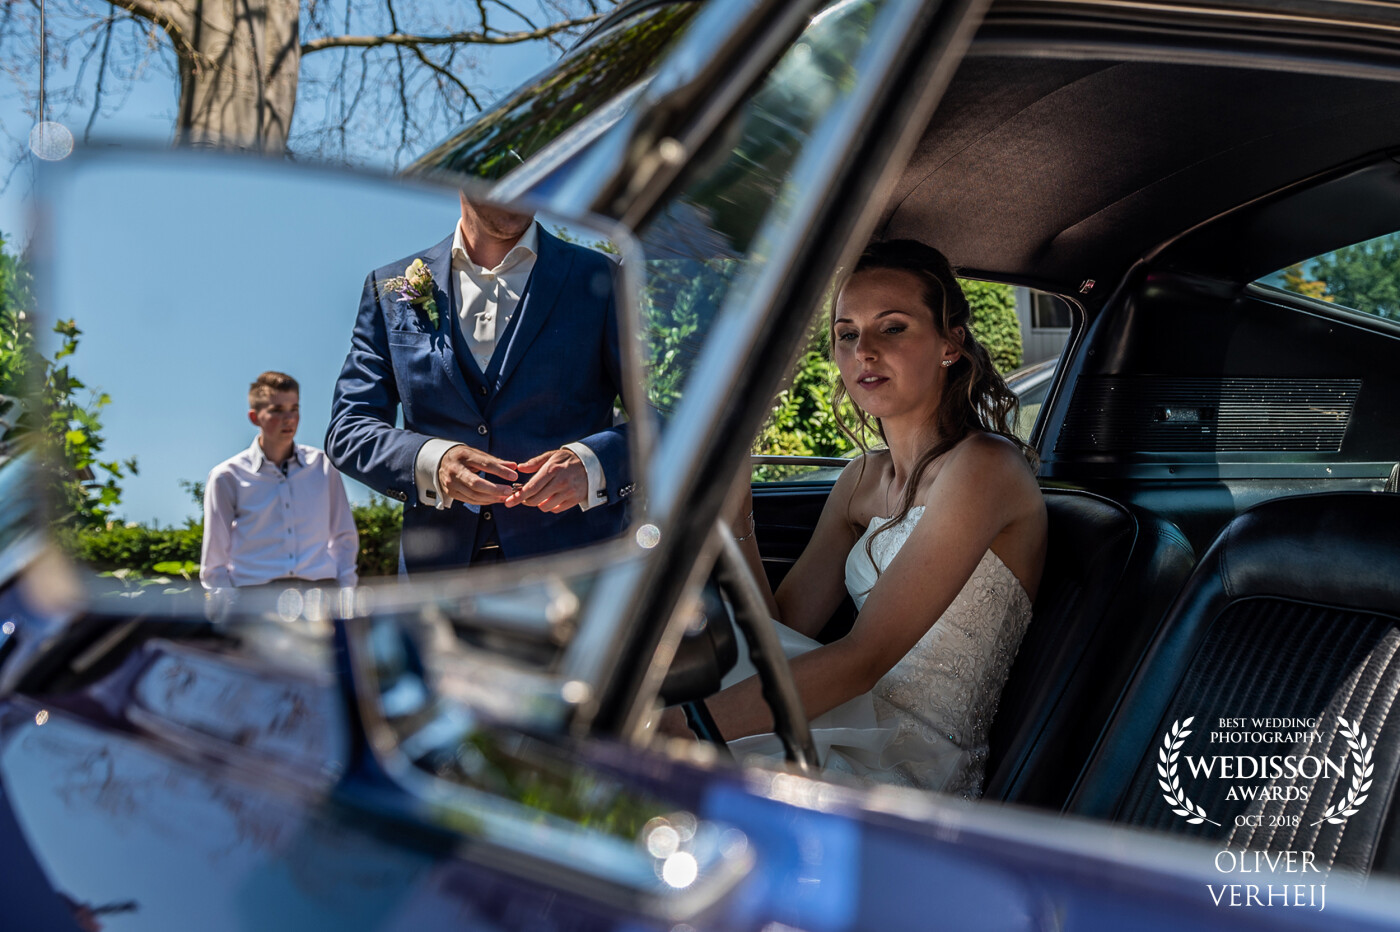 Right after the first look we went to a nice location for the photoshooting. The groom arranged an awesome classic Ford Mustang. I captured this great moment in a split second when leaving the brides house. 